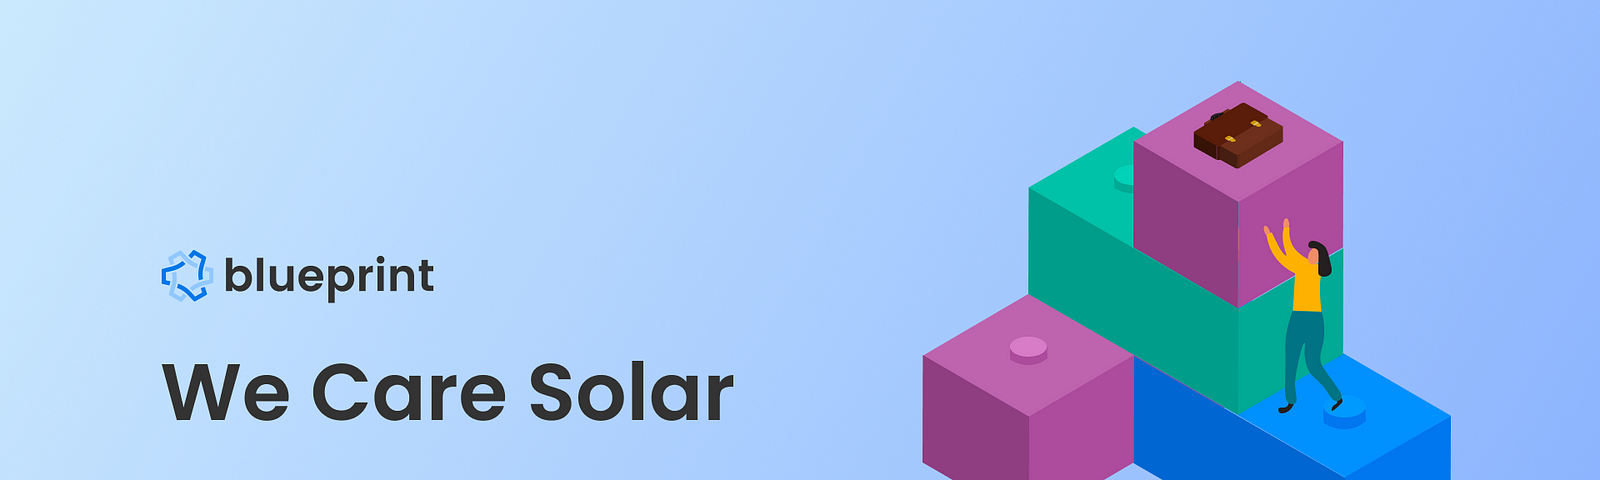 Illustration of person on top of lego tower decorated with a suitcase ball icon. Text says We Care Solar Project Recap 2020–2021